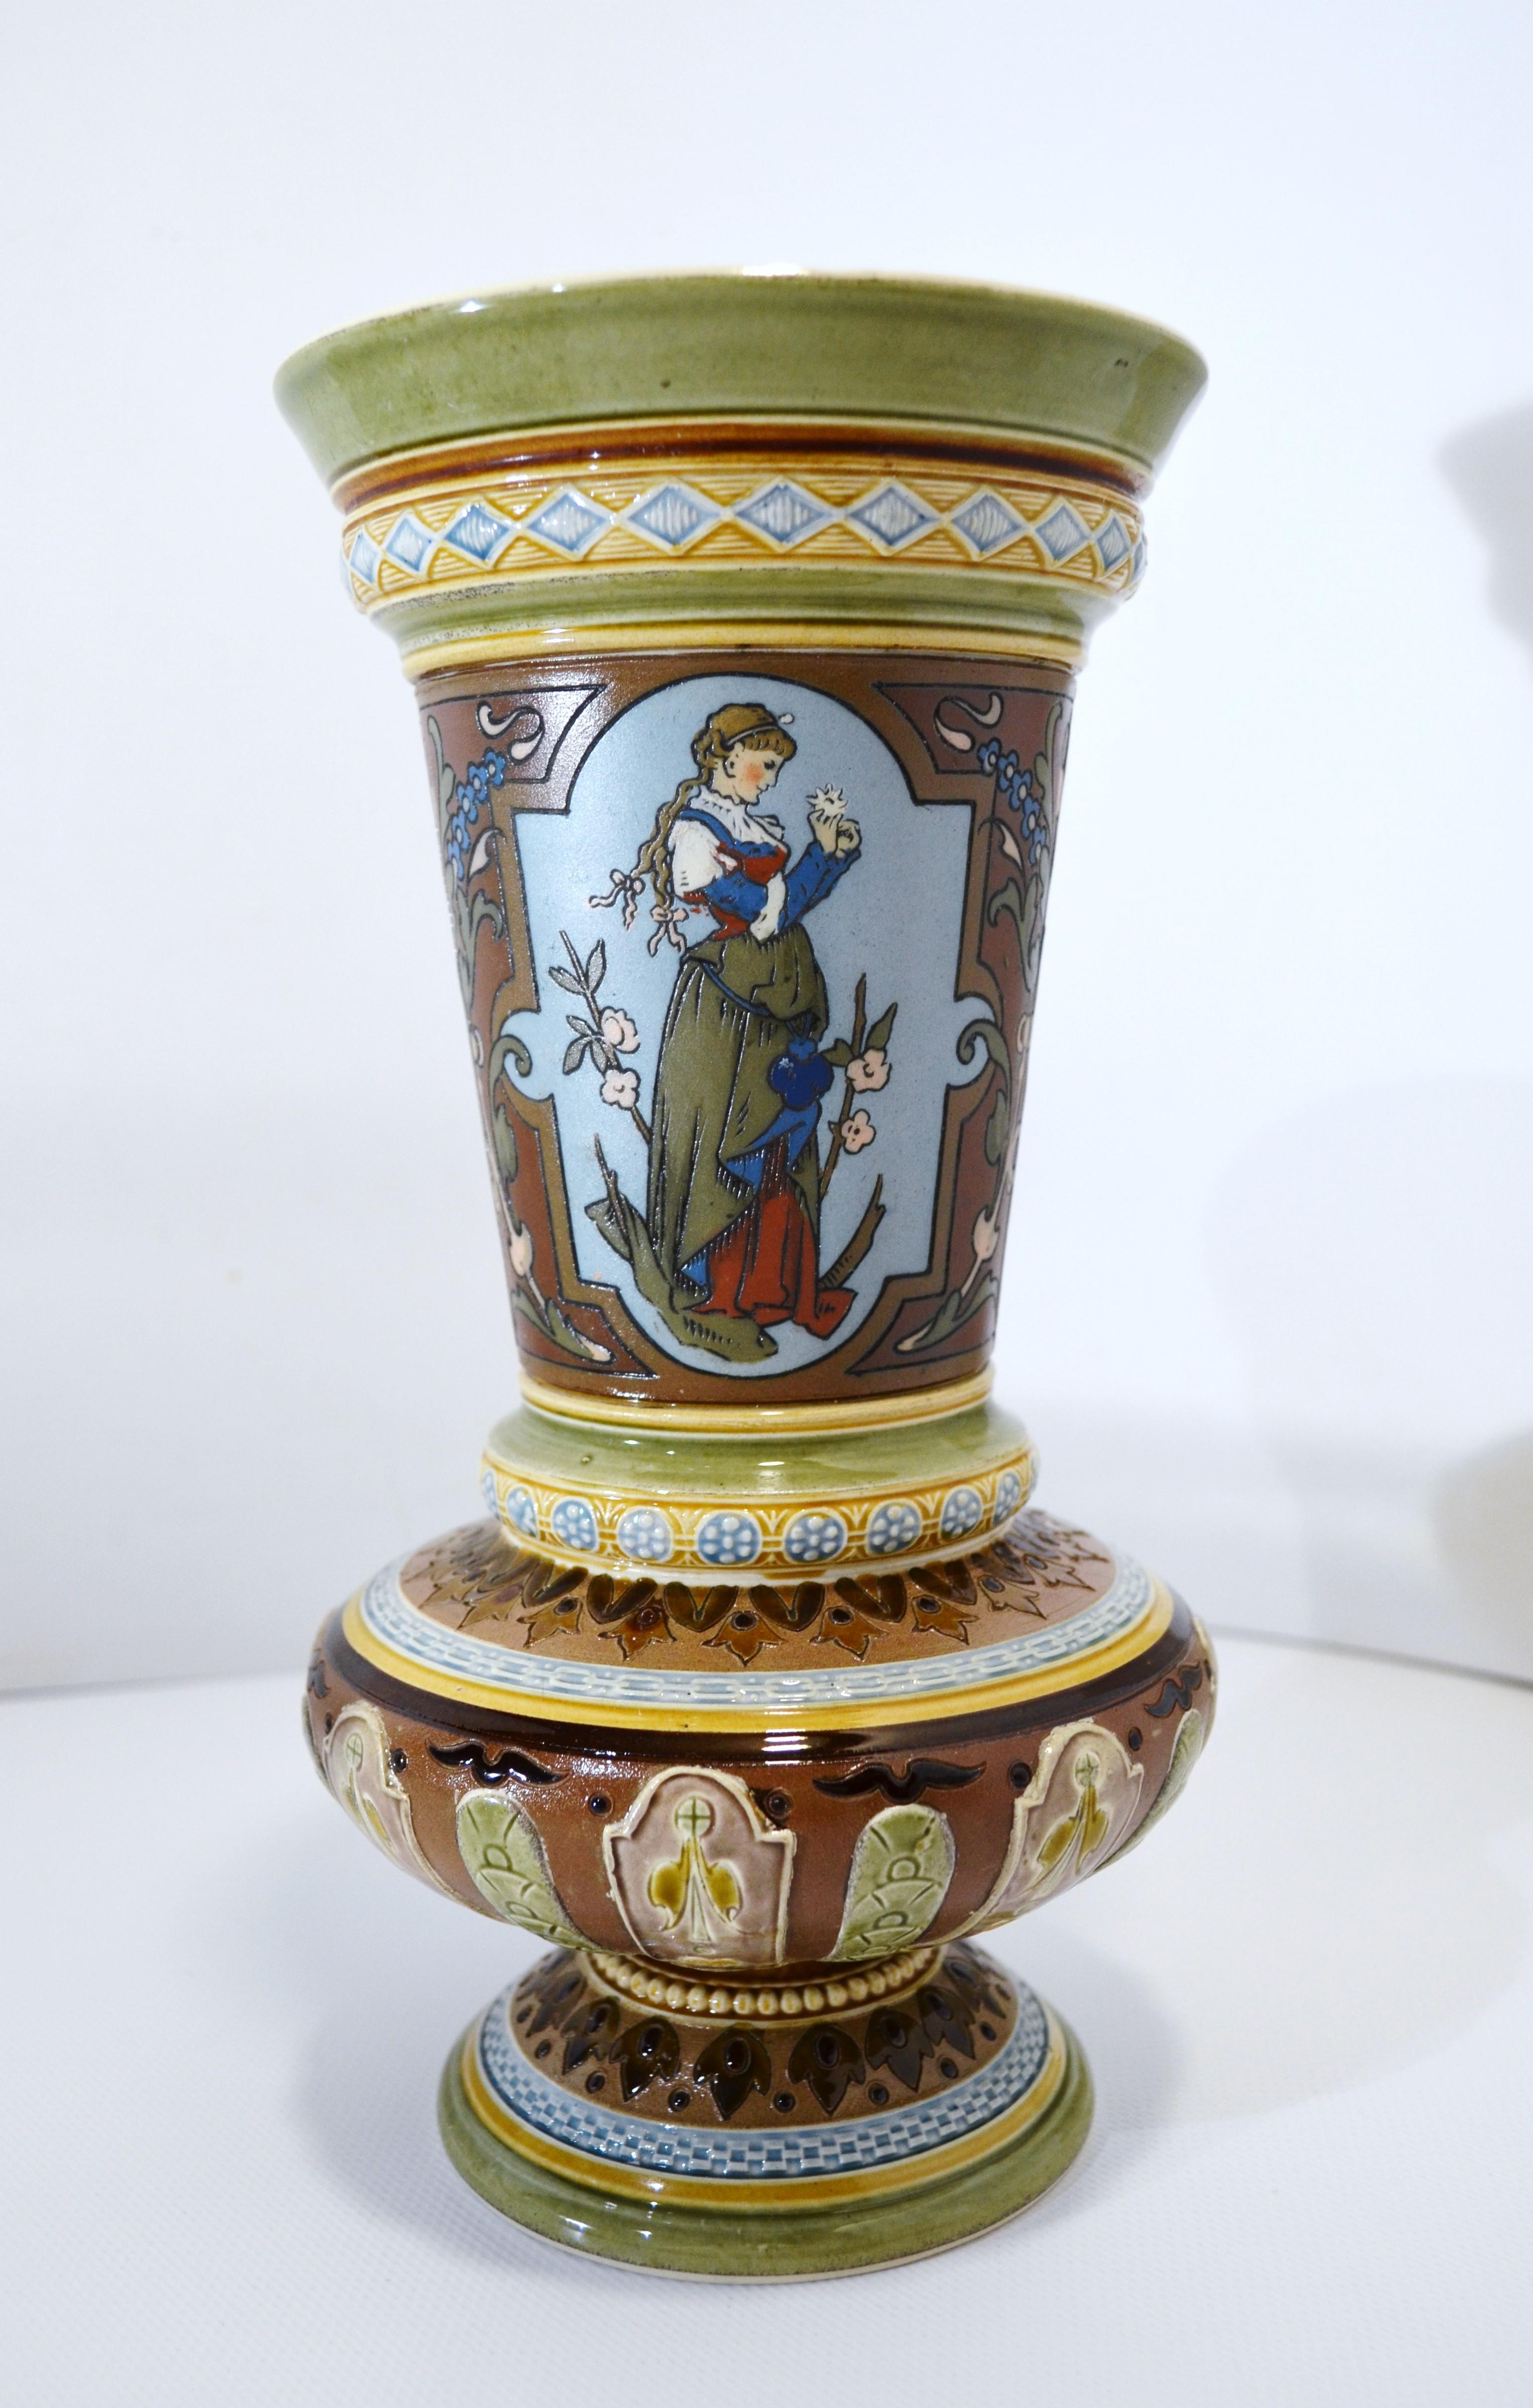 Beautiful vase from the end of the 19th century to 1900 in mosaic-engraved ceramic signed by the brand Villeroy & Boch Mettlach

decor: Women in traditional folk clothes

Dimensions: Collar height: 23.7 cm - maximum diameter: 12.5 cm - weight: 1